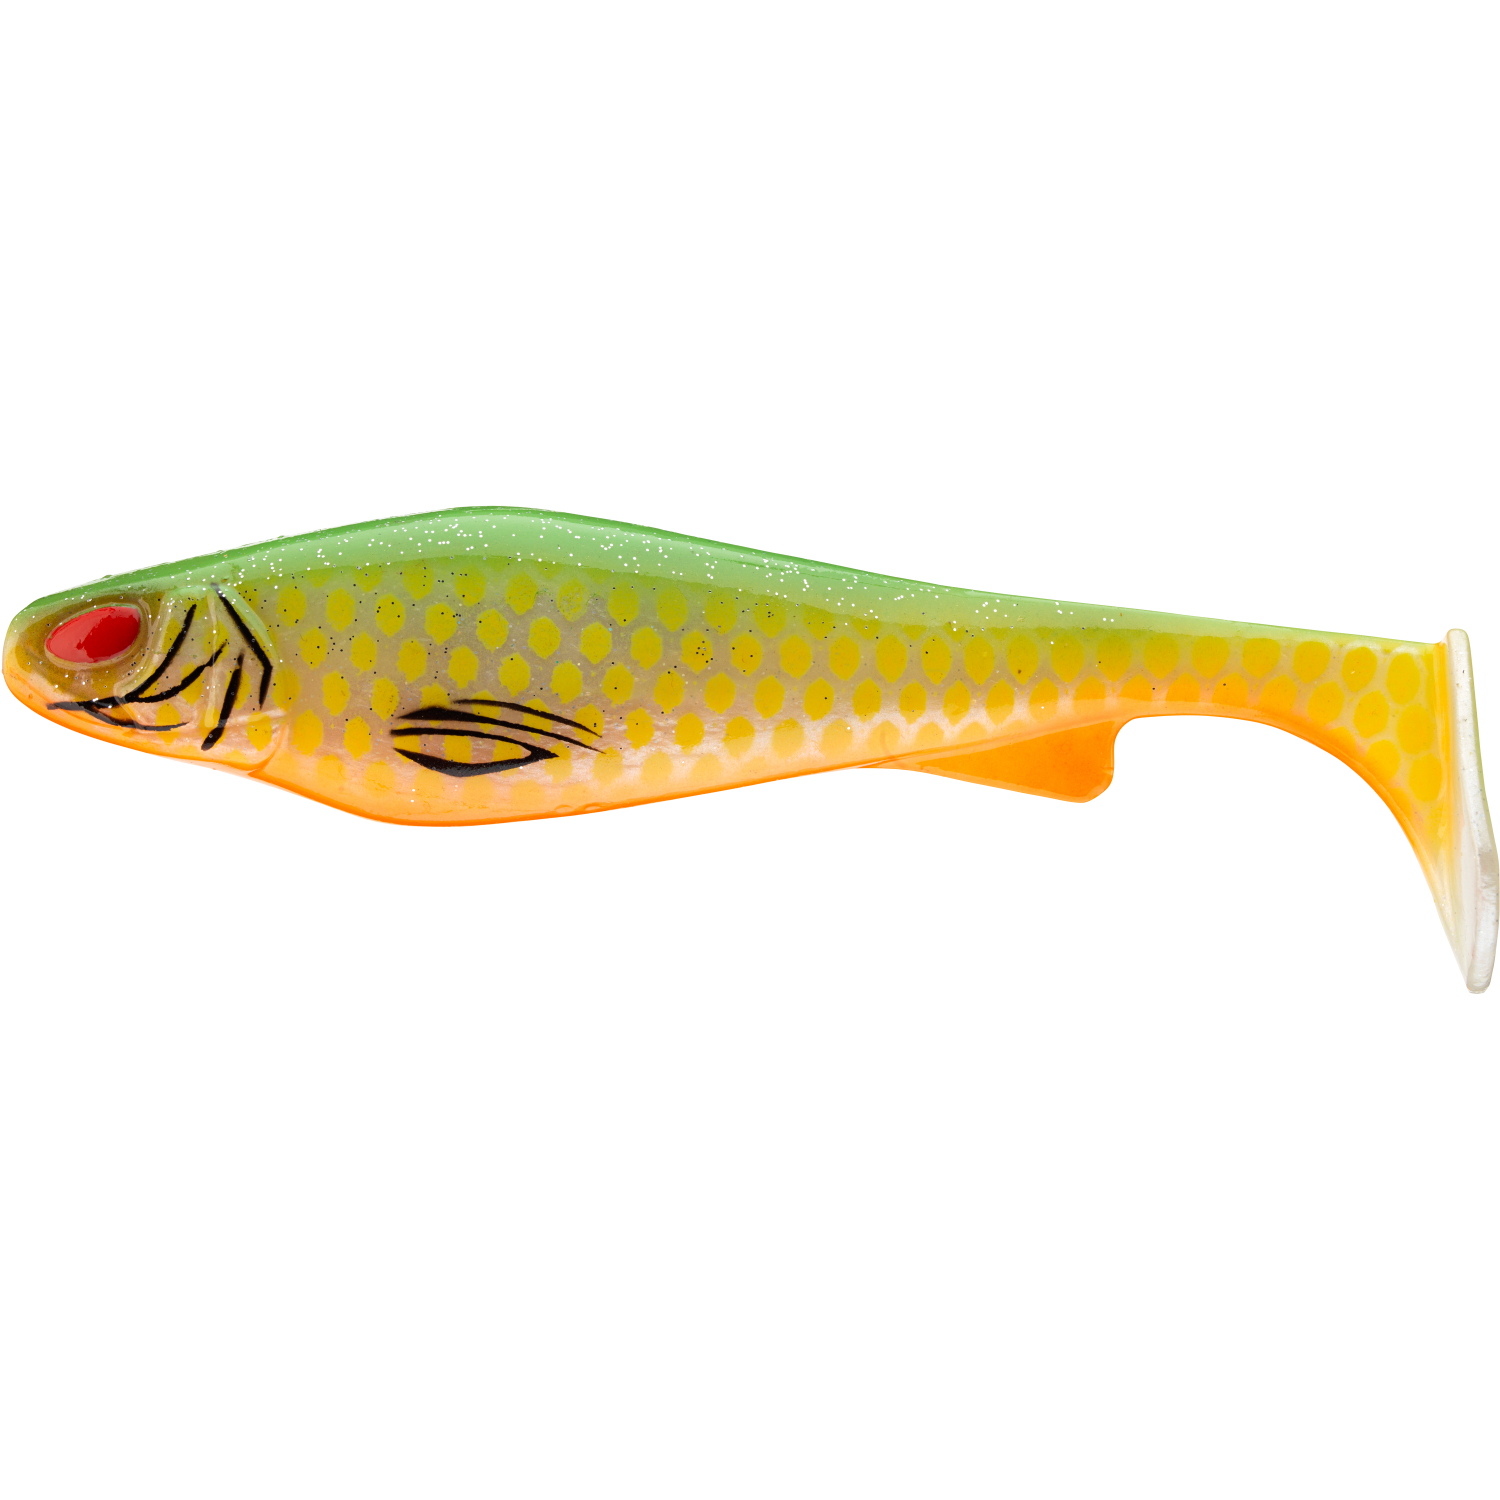 Prorex Rubber Fish Lazy Shad (Olive Roach UV) at low prices